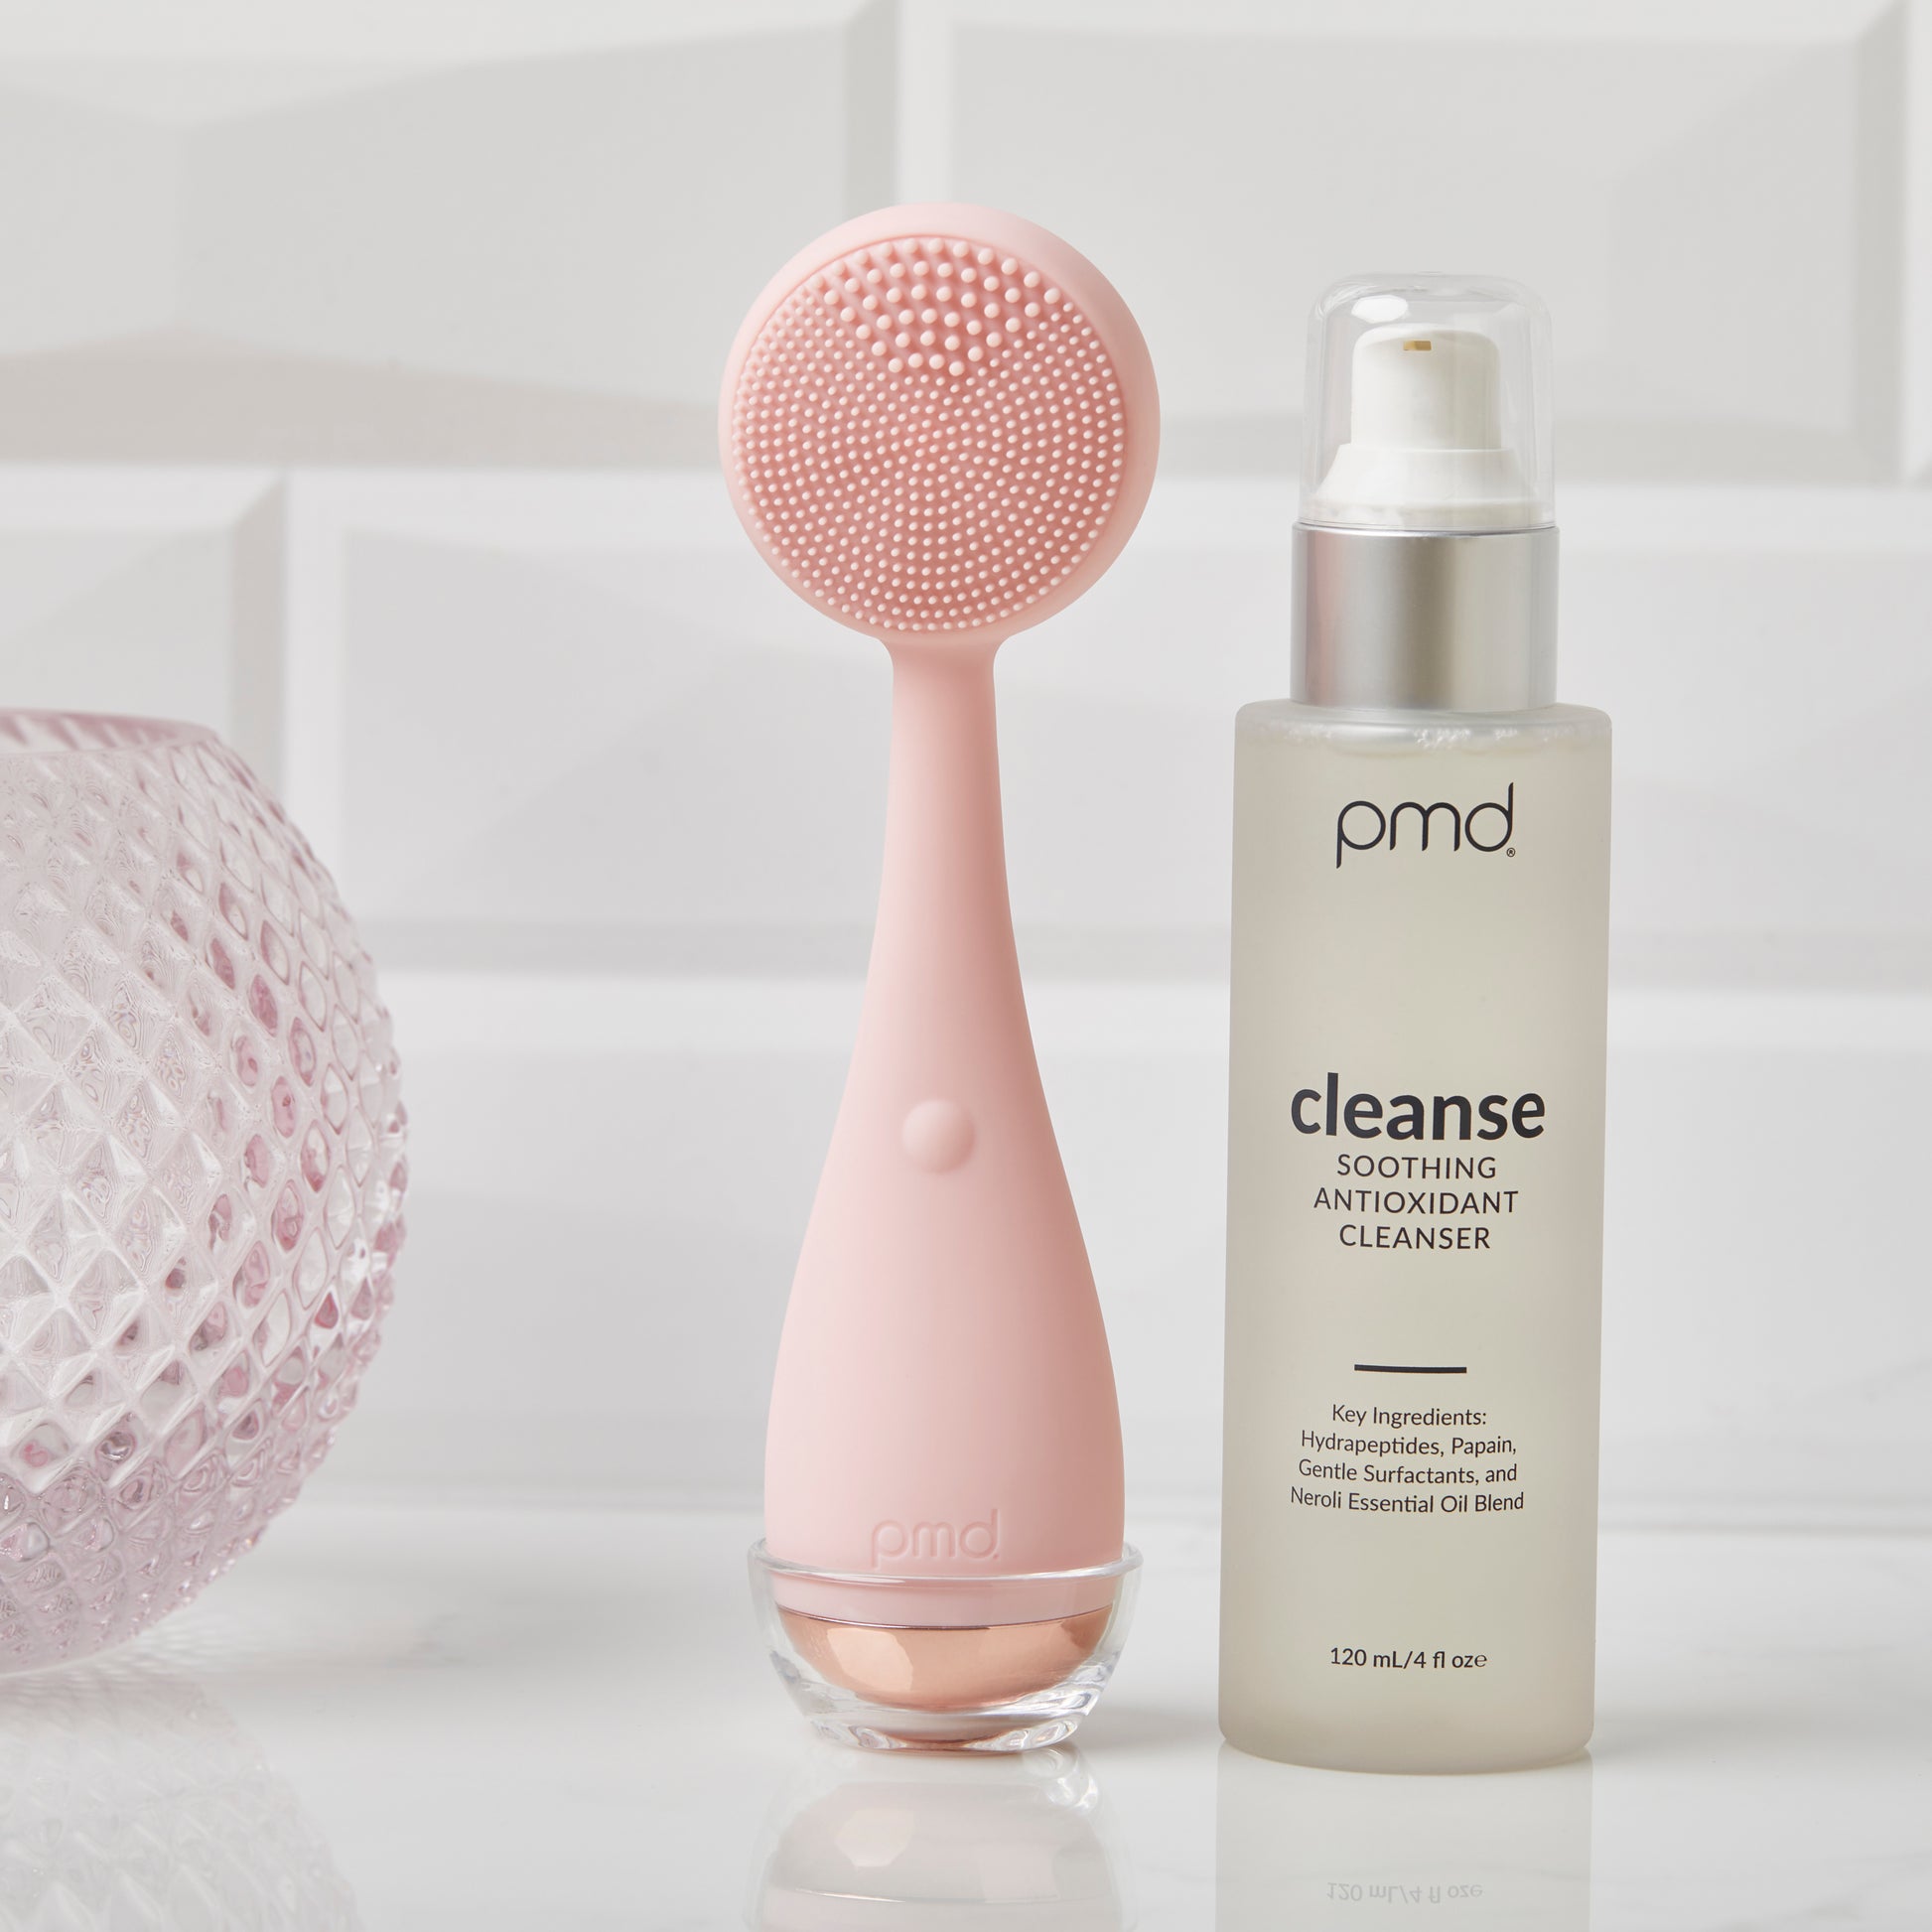 4001-Blush?PMD Clean in blush on counter with PMD Cleanser